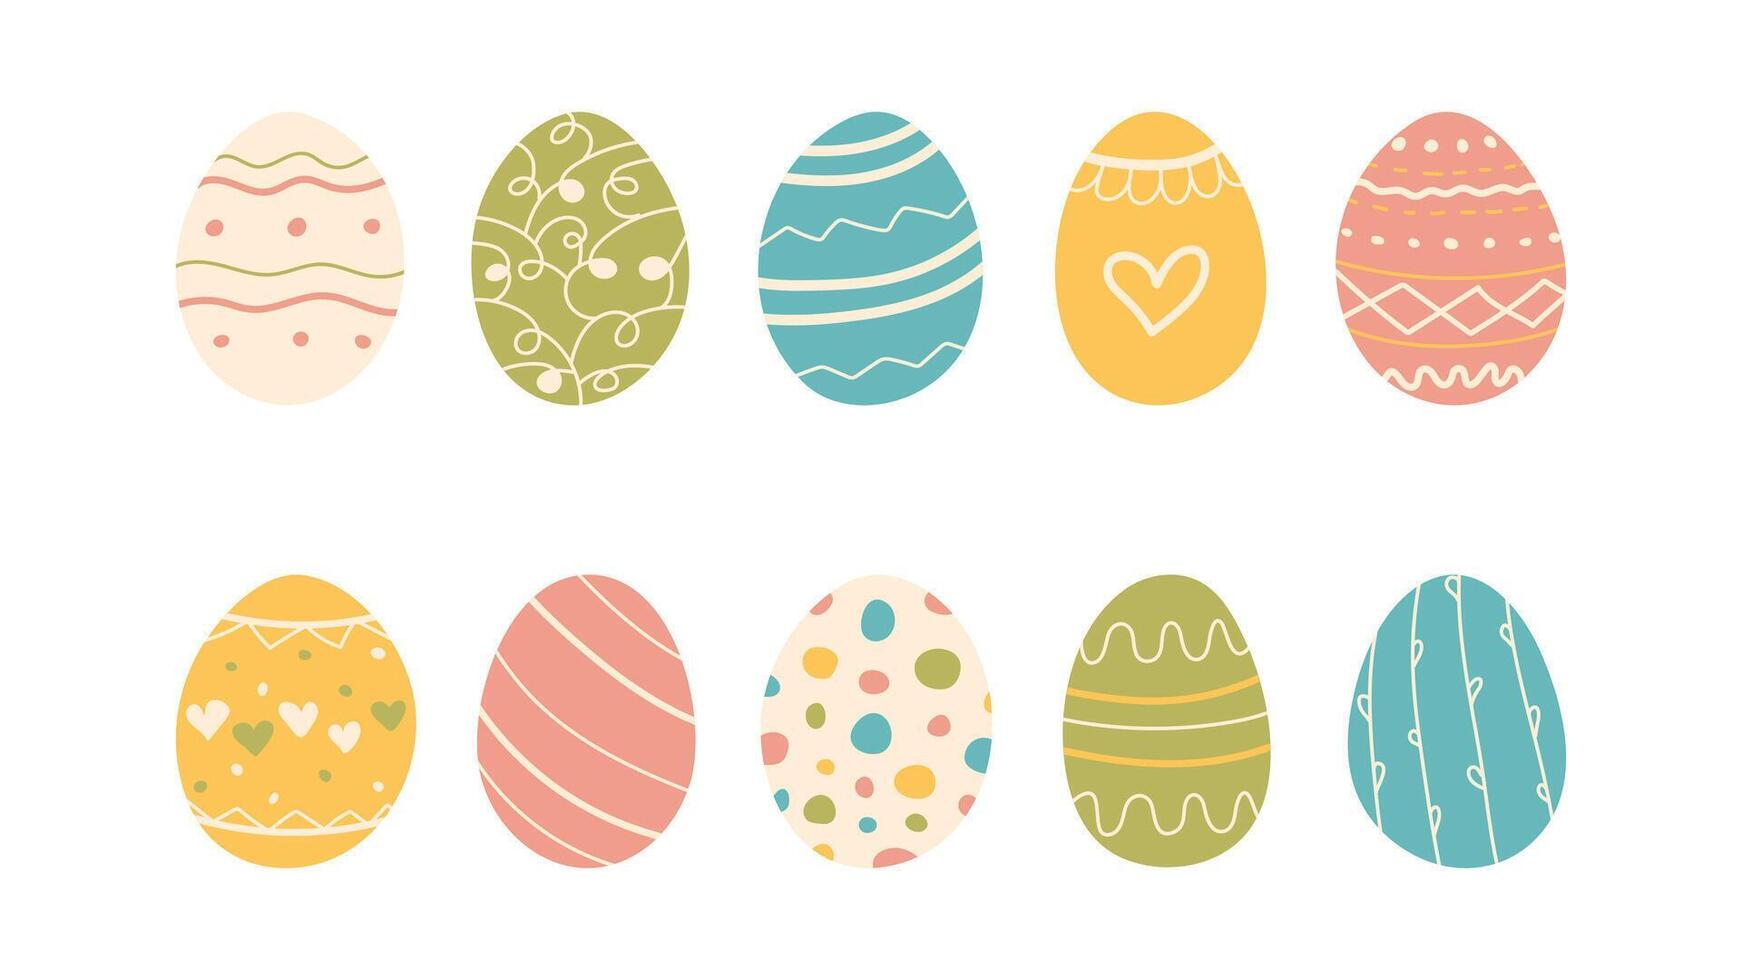 Multicolored hand drawn Easter eggs set. Doodle style Shell decorated with different shapes, lines and circles in various colors. Simple icons and elements for posters and holiday banners vector